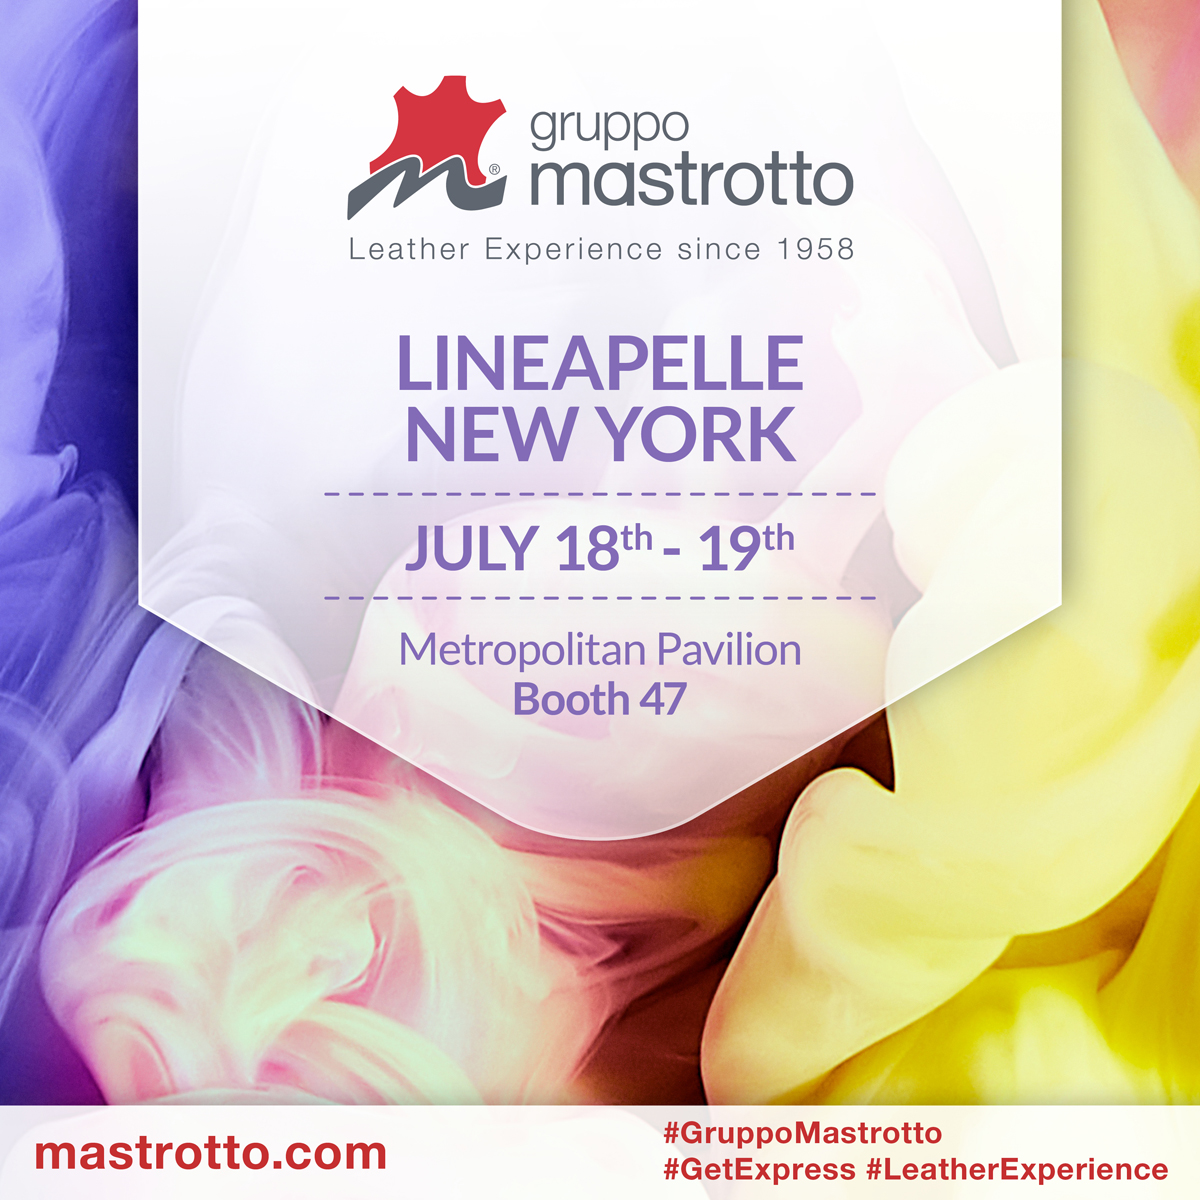 Mastrotto Lineapelle NewYork July 18th-19th